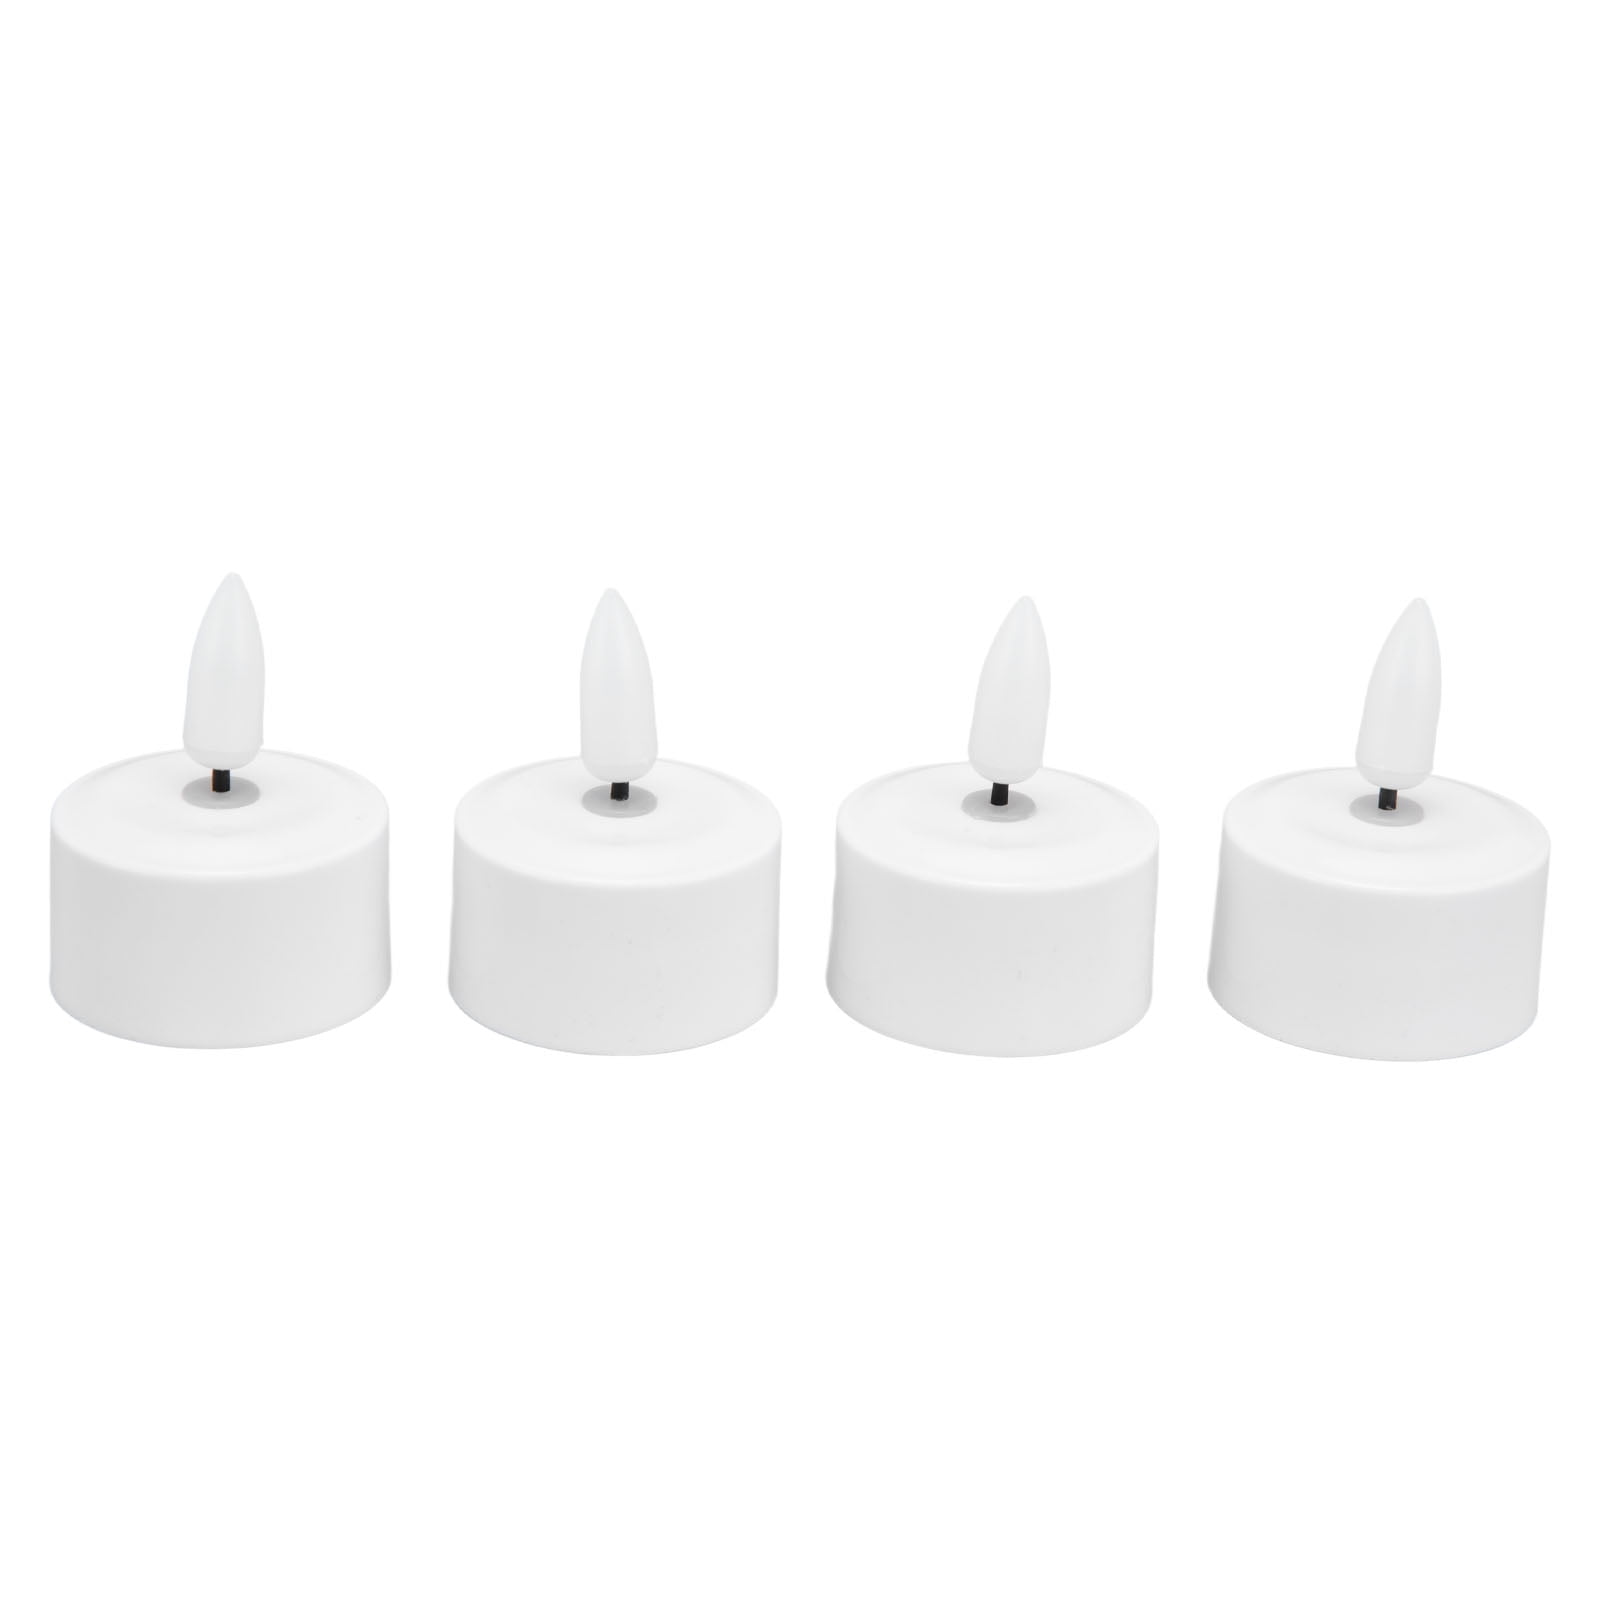 LED Flickering Flameless Candles, Reusable Battery Operated 100-240V Wireless Charging Rechargeable Candle Lights For Weddings US Plug - Walmart.com